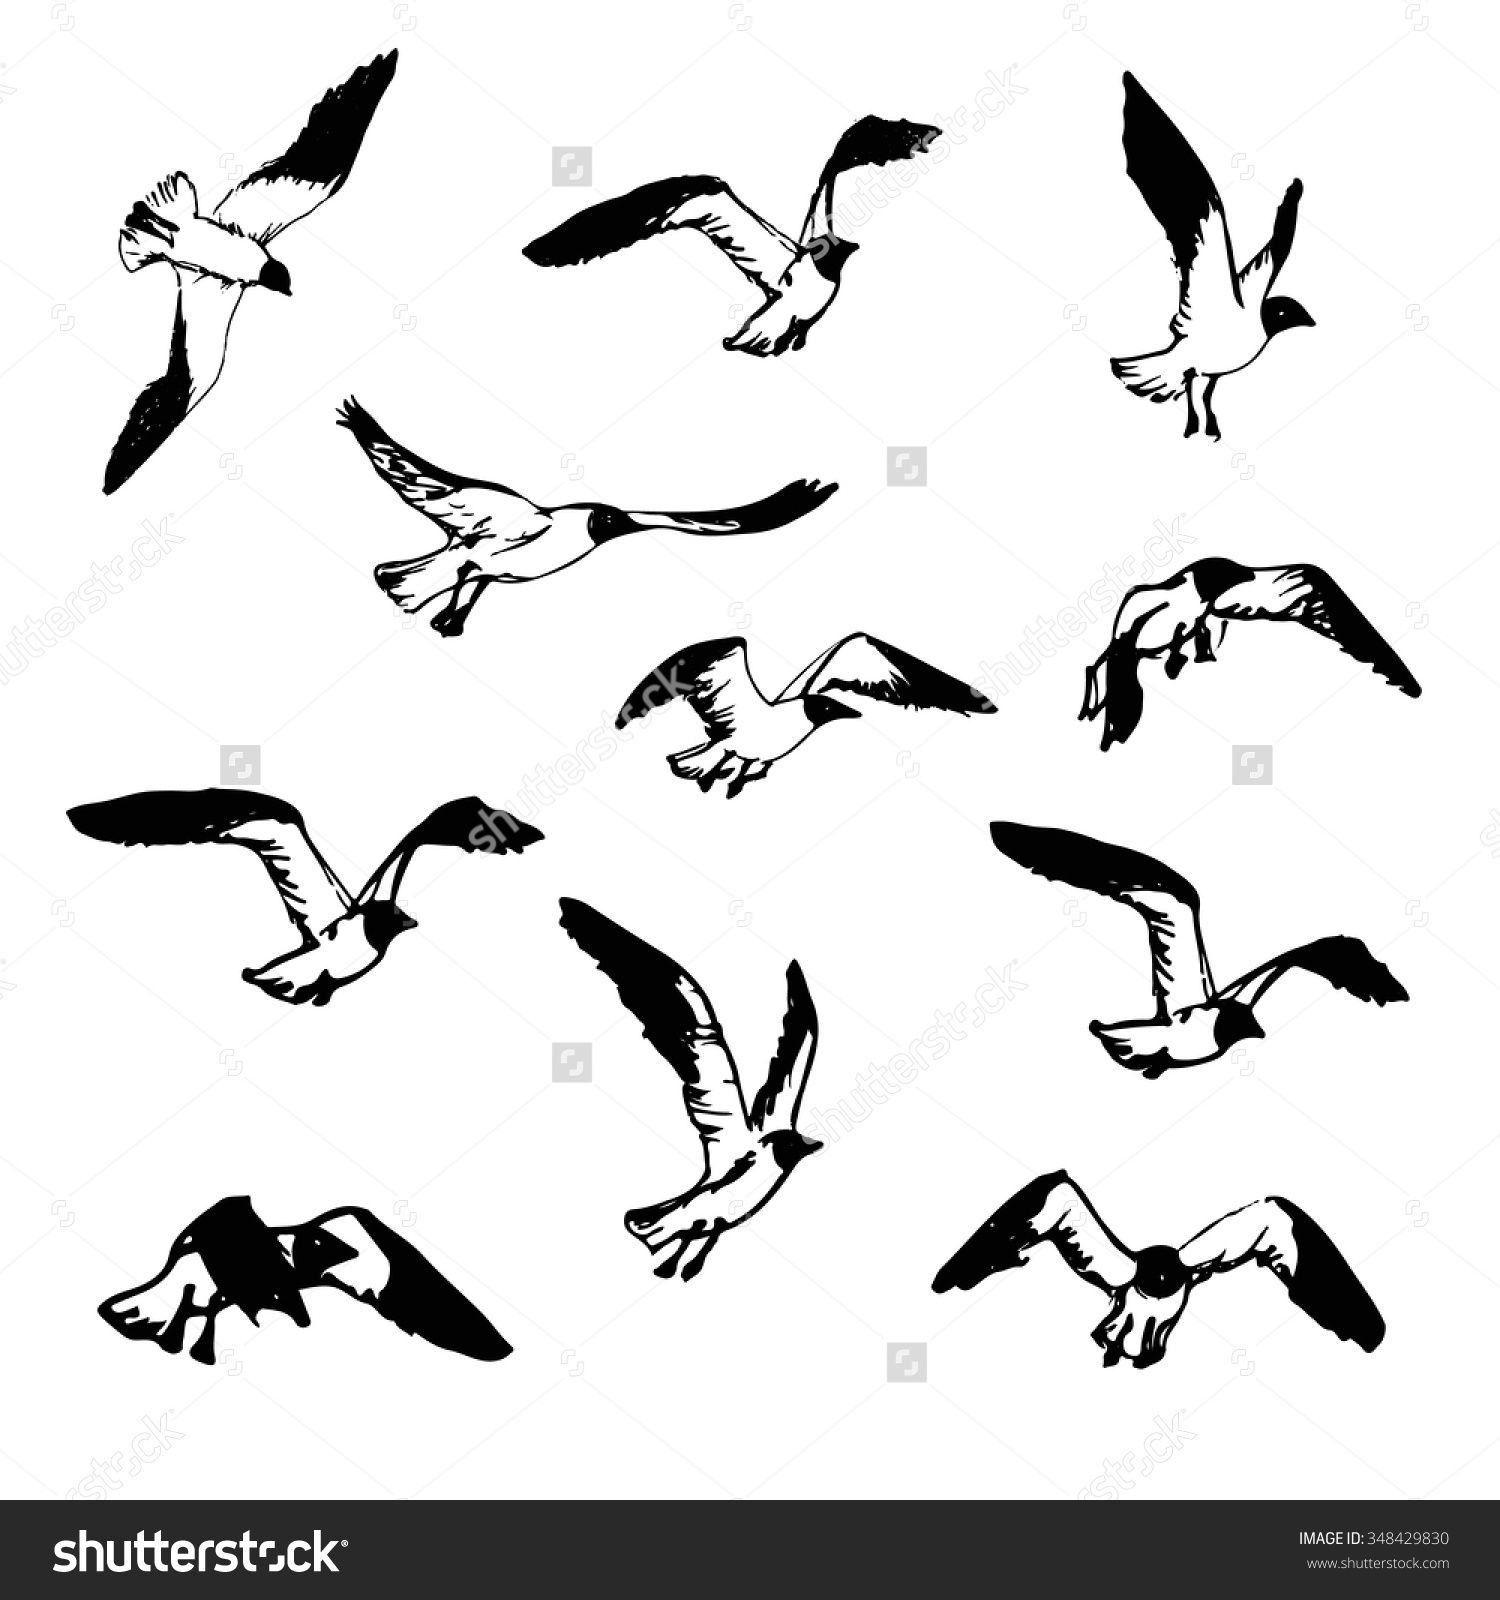 Hand Drawn Flying Seagulls. Black And White Illustration Sketch ...